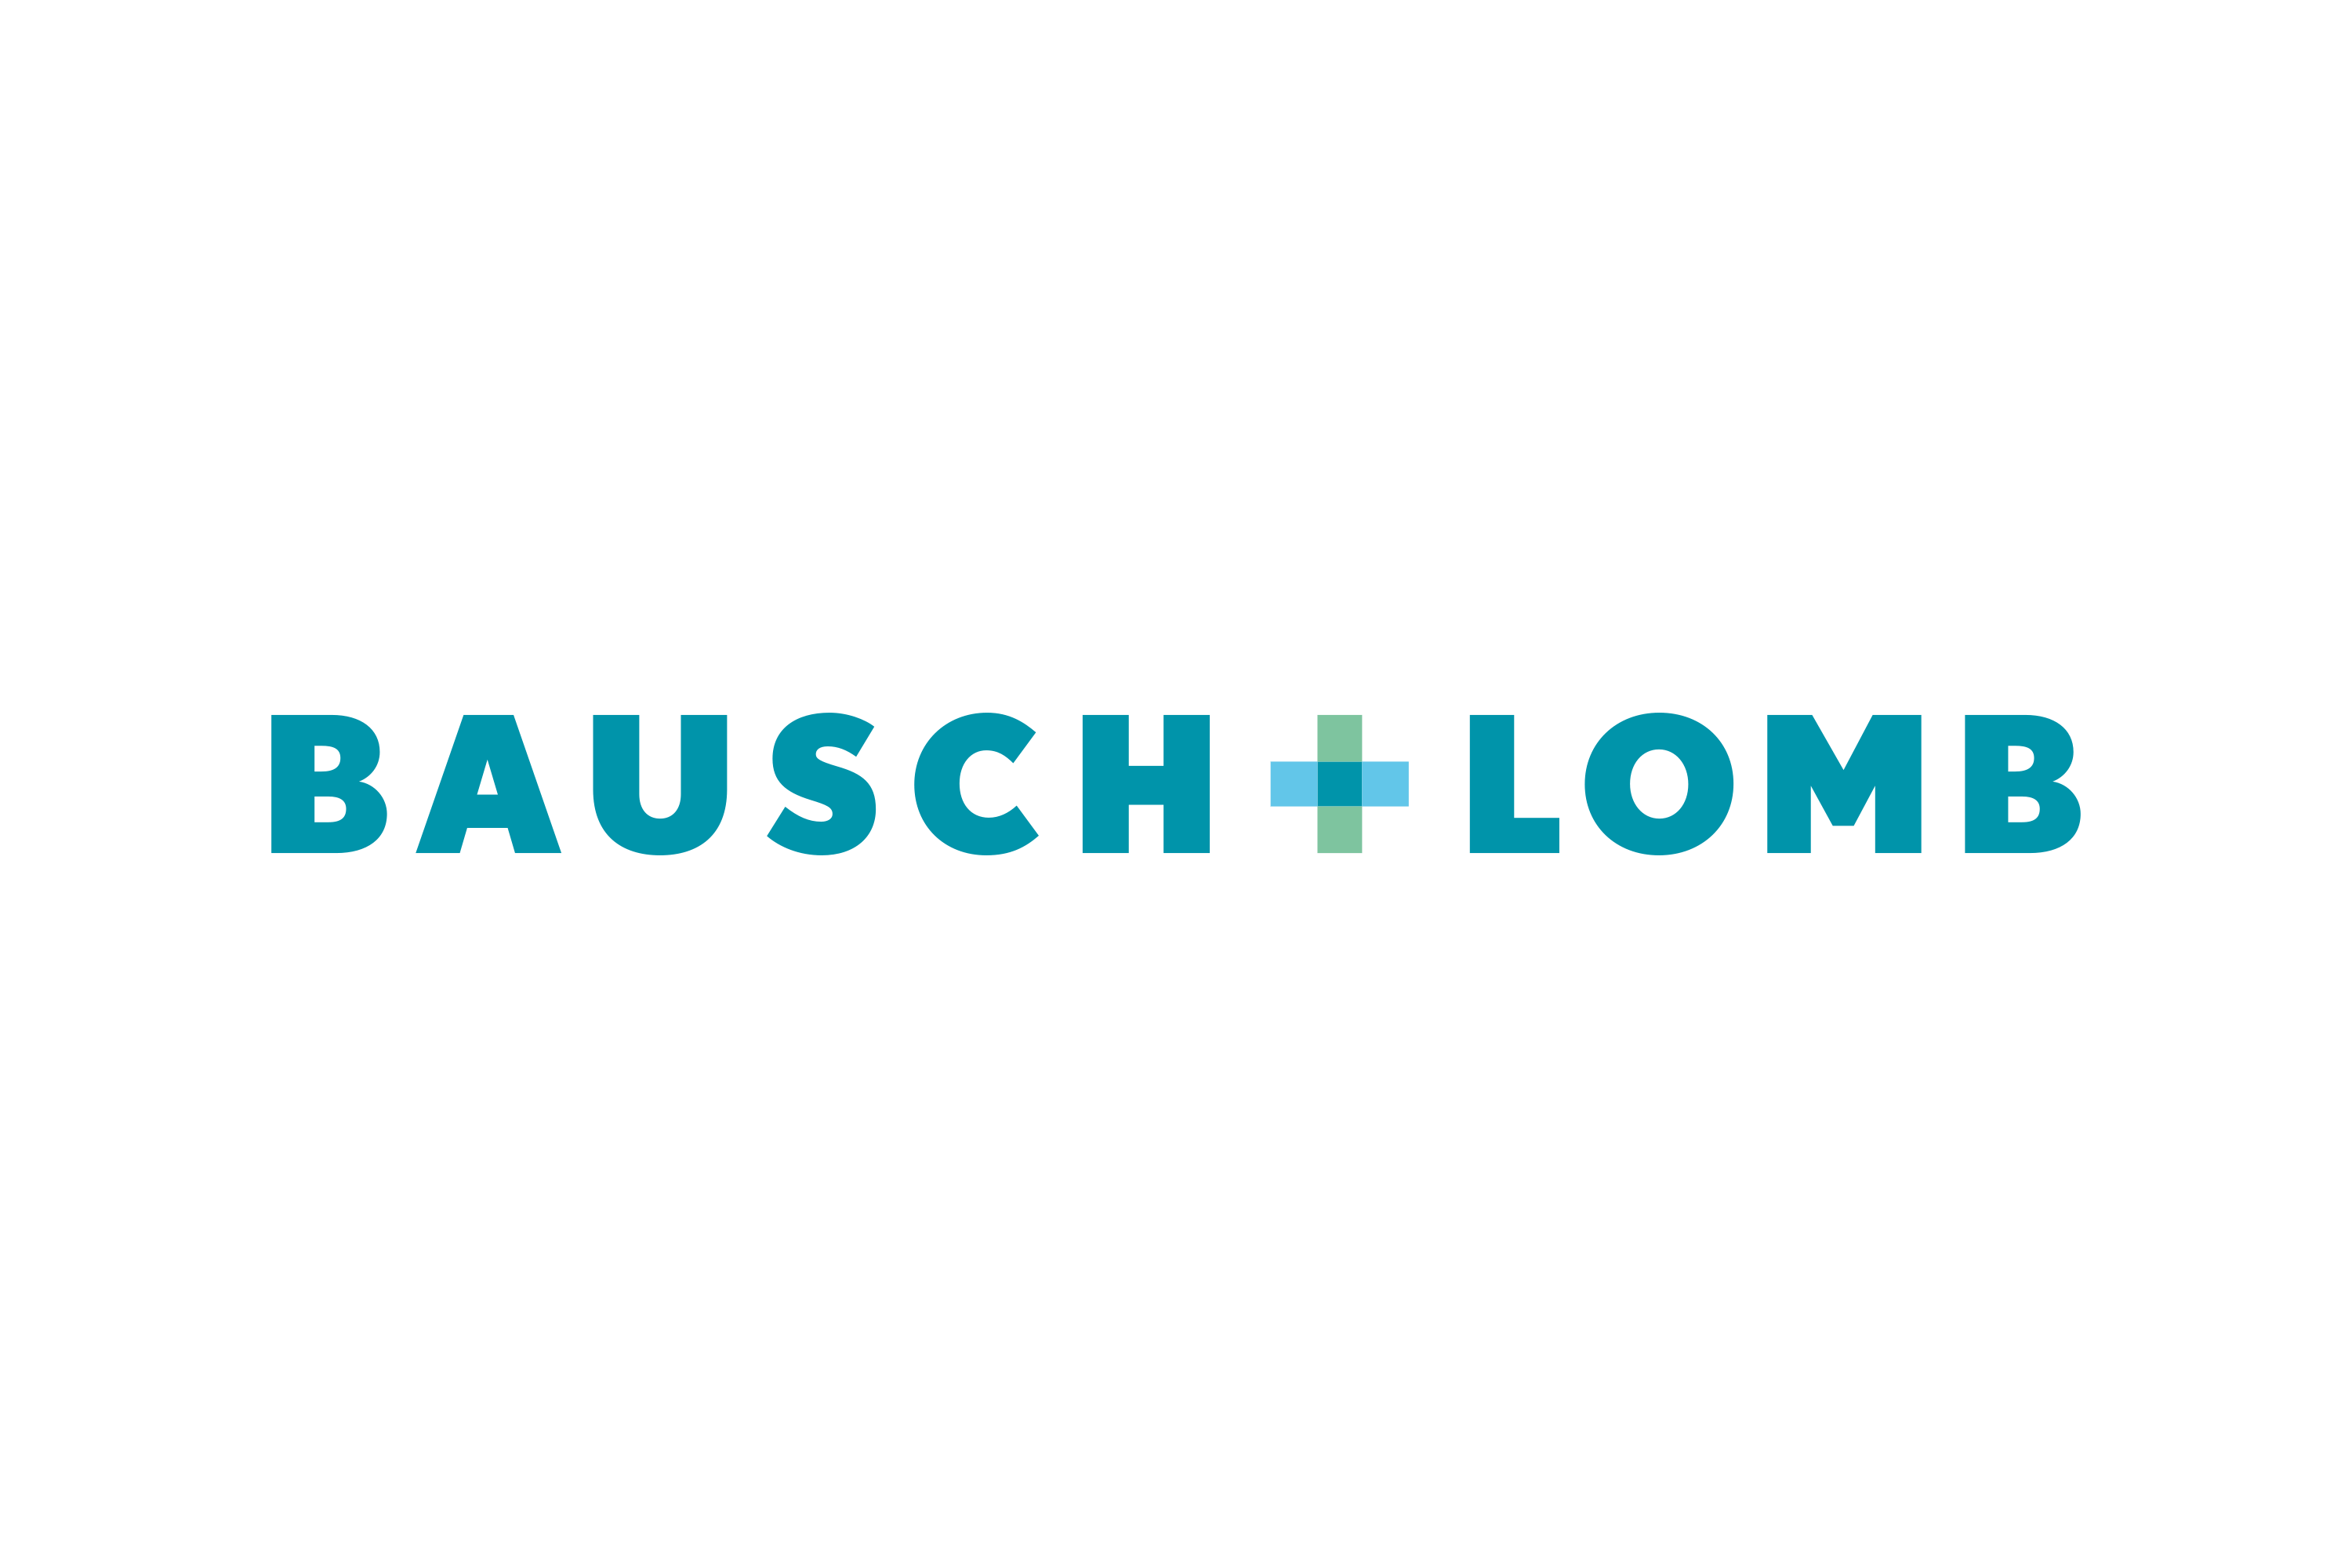 Download Bausch & Lomb Logo in SVG Vector or PNG File Format ...